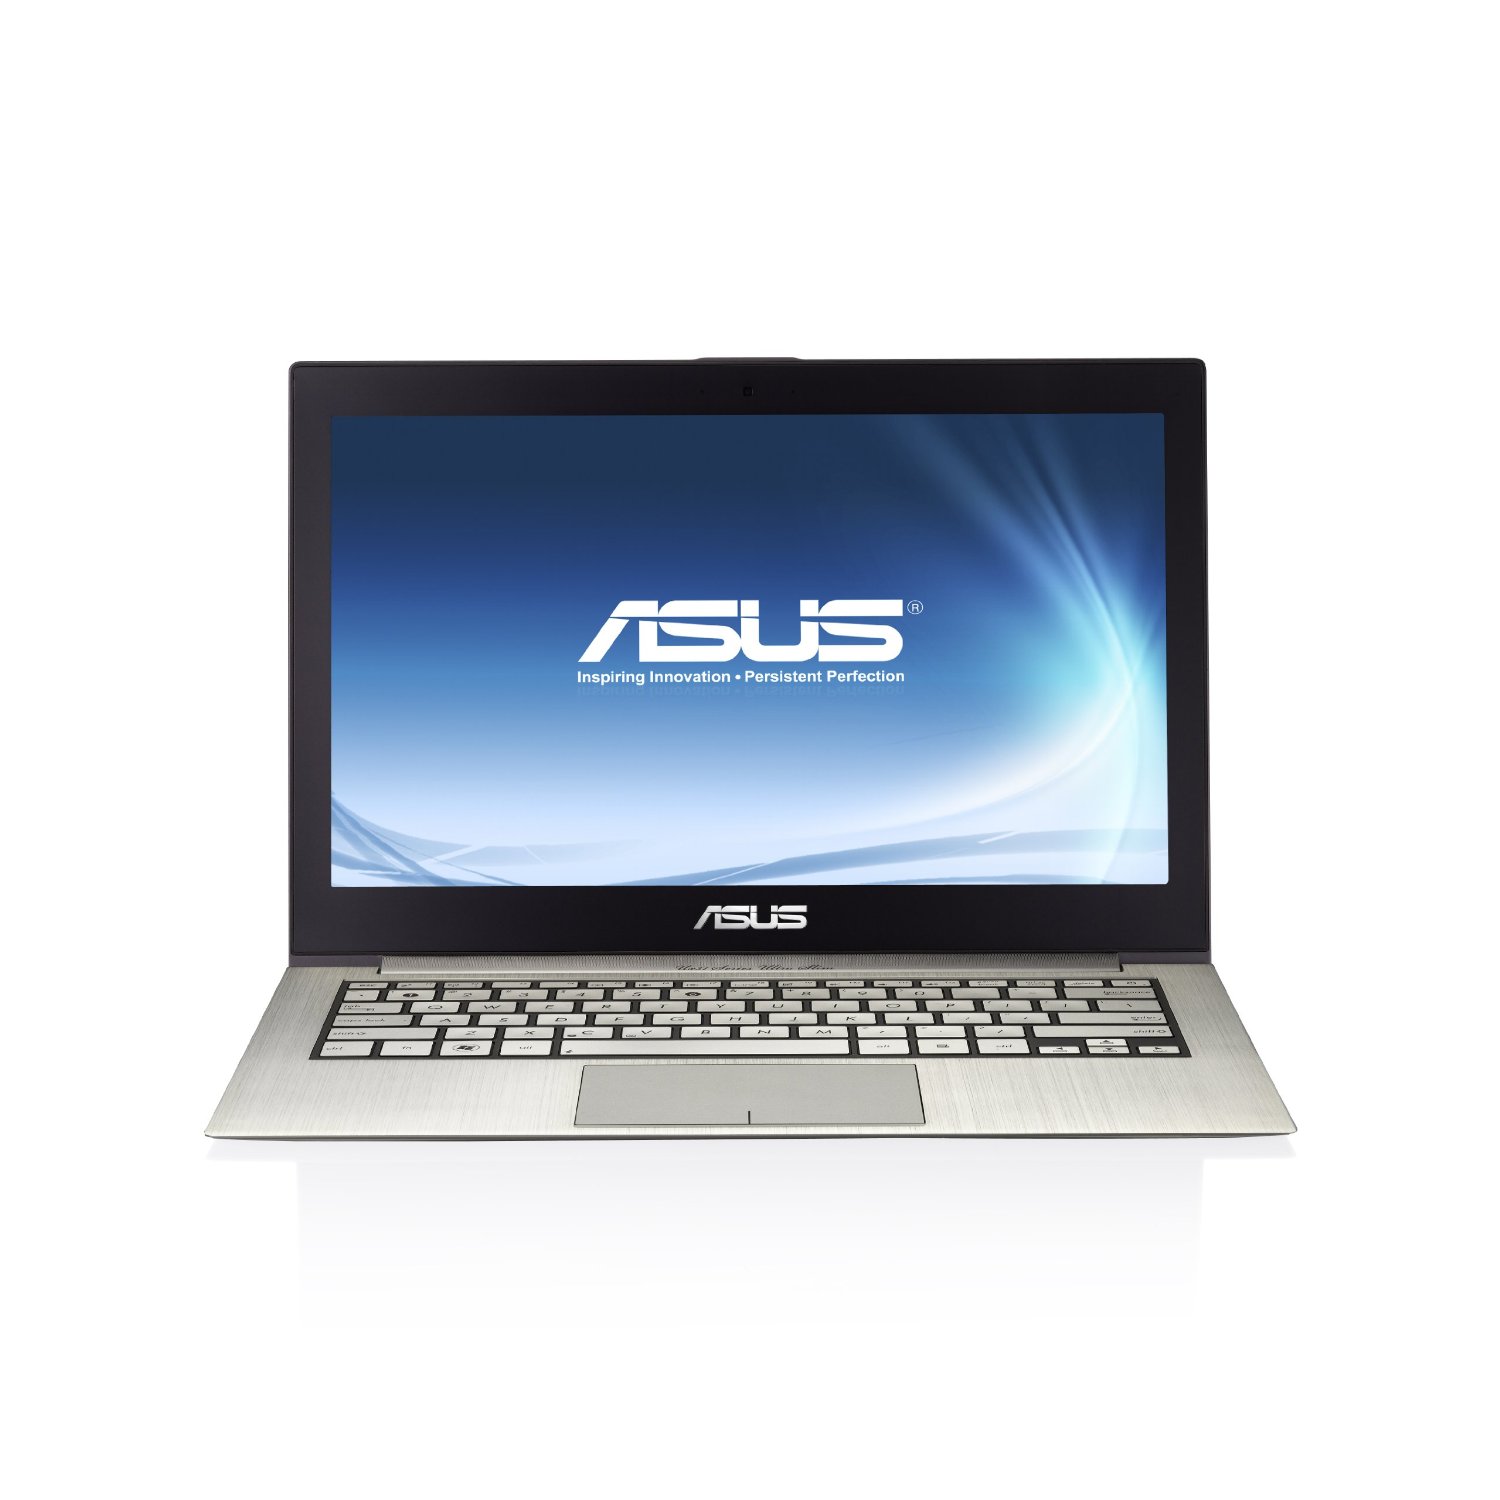 https://thetechjournal.com/wp-content/uploads/images/1111/1322100736-asus-zenbook-ux31edh72-133inch-thin-and-light-ultrabook-1.jpg